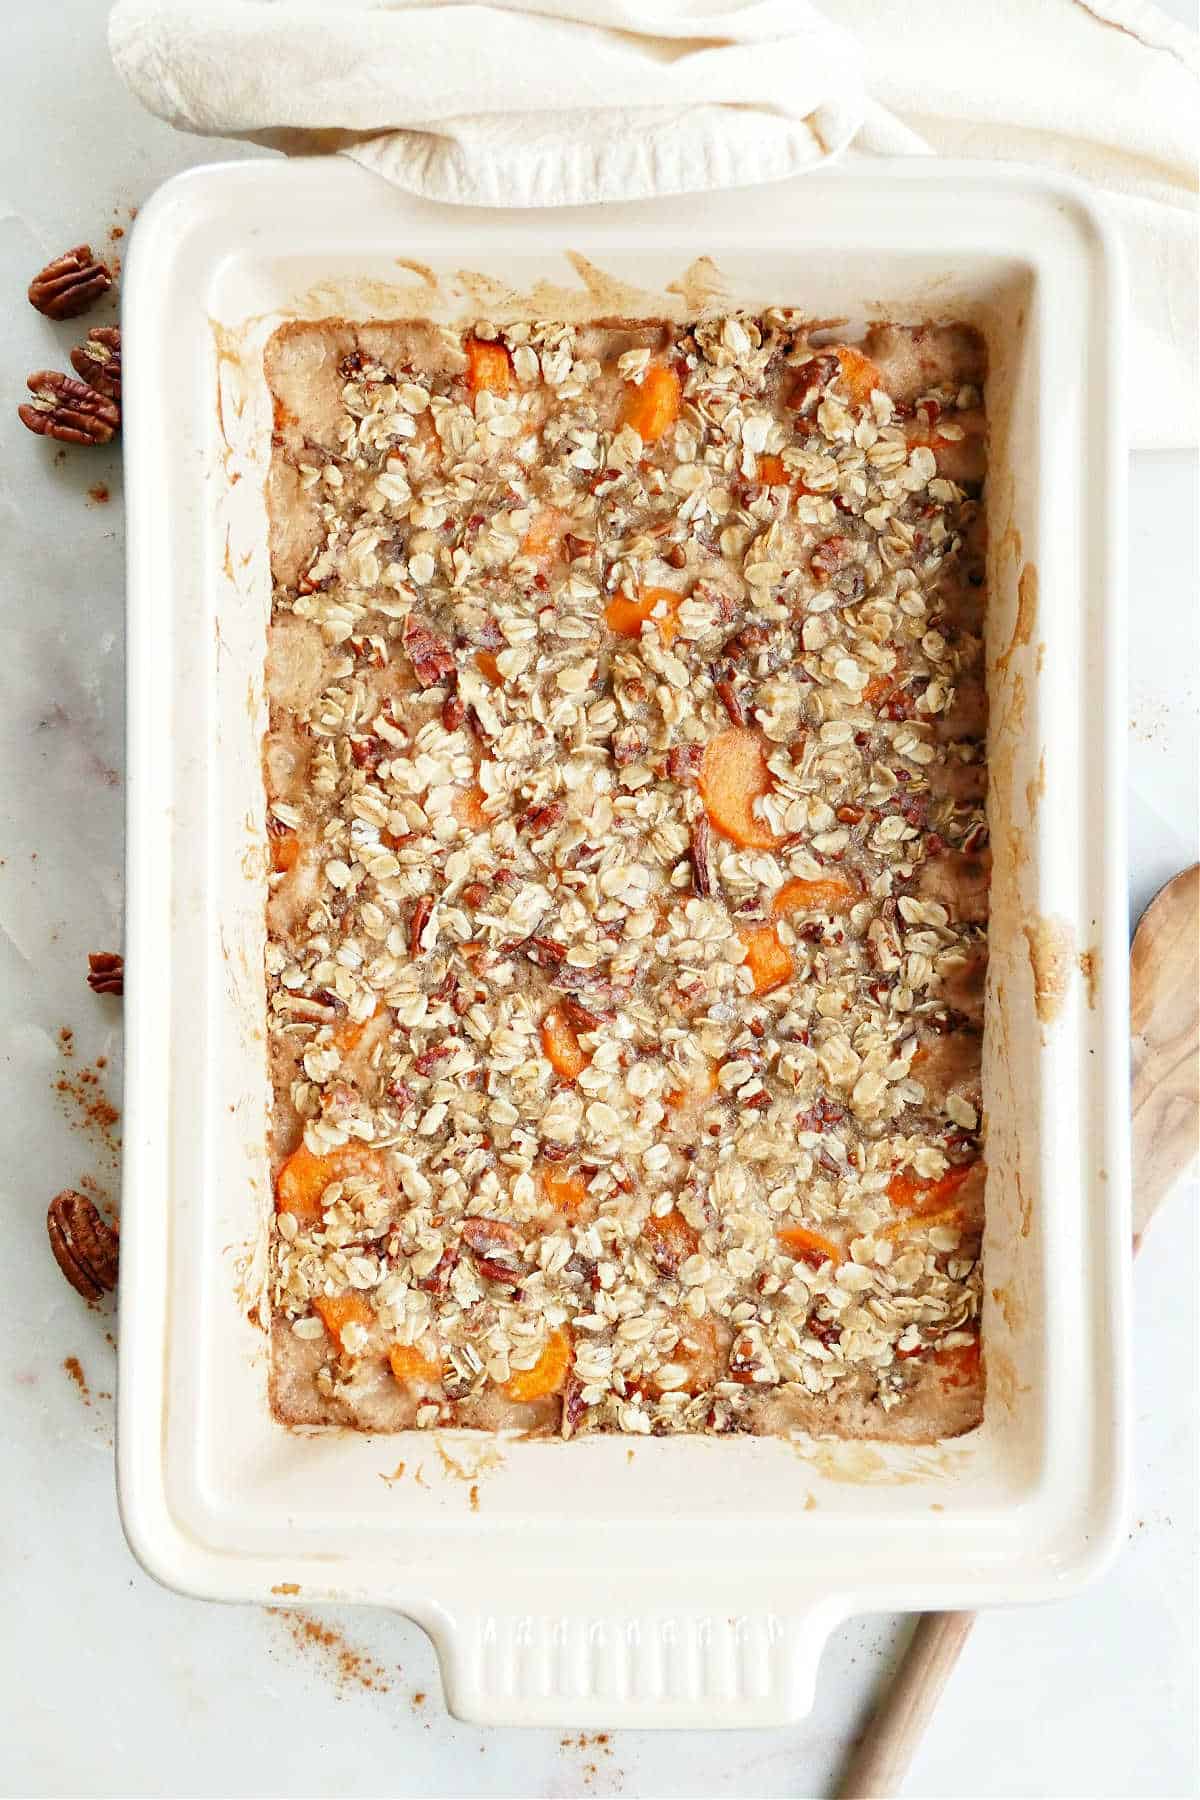 carrot casserole with oat topping in a baking dish on a counter